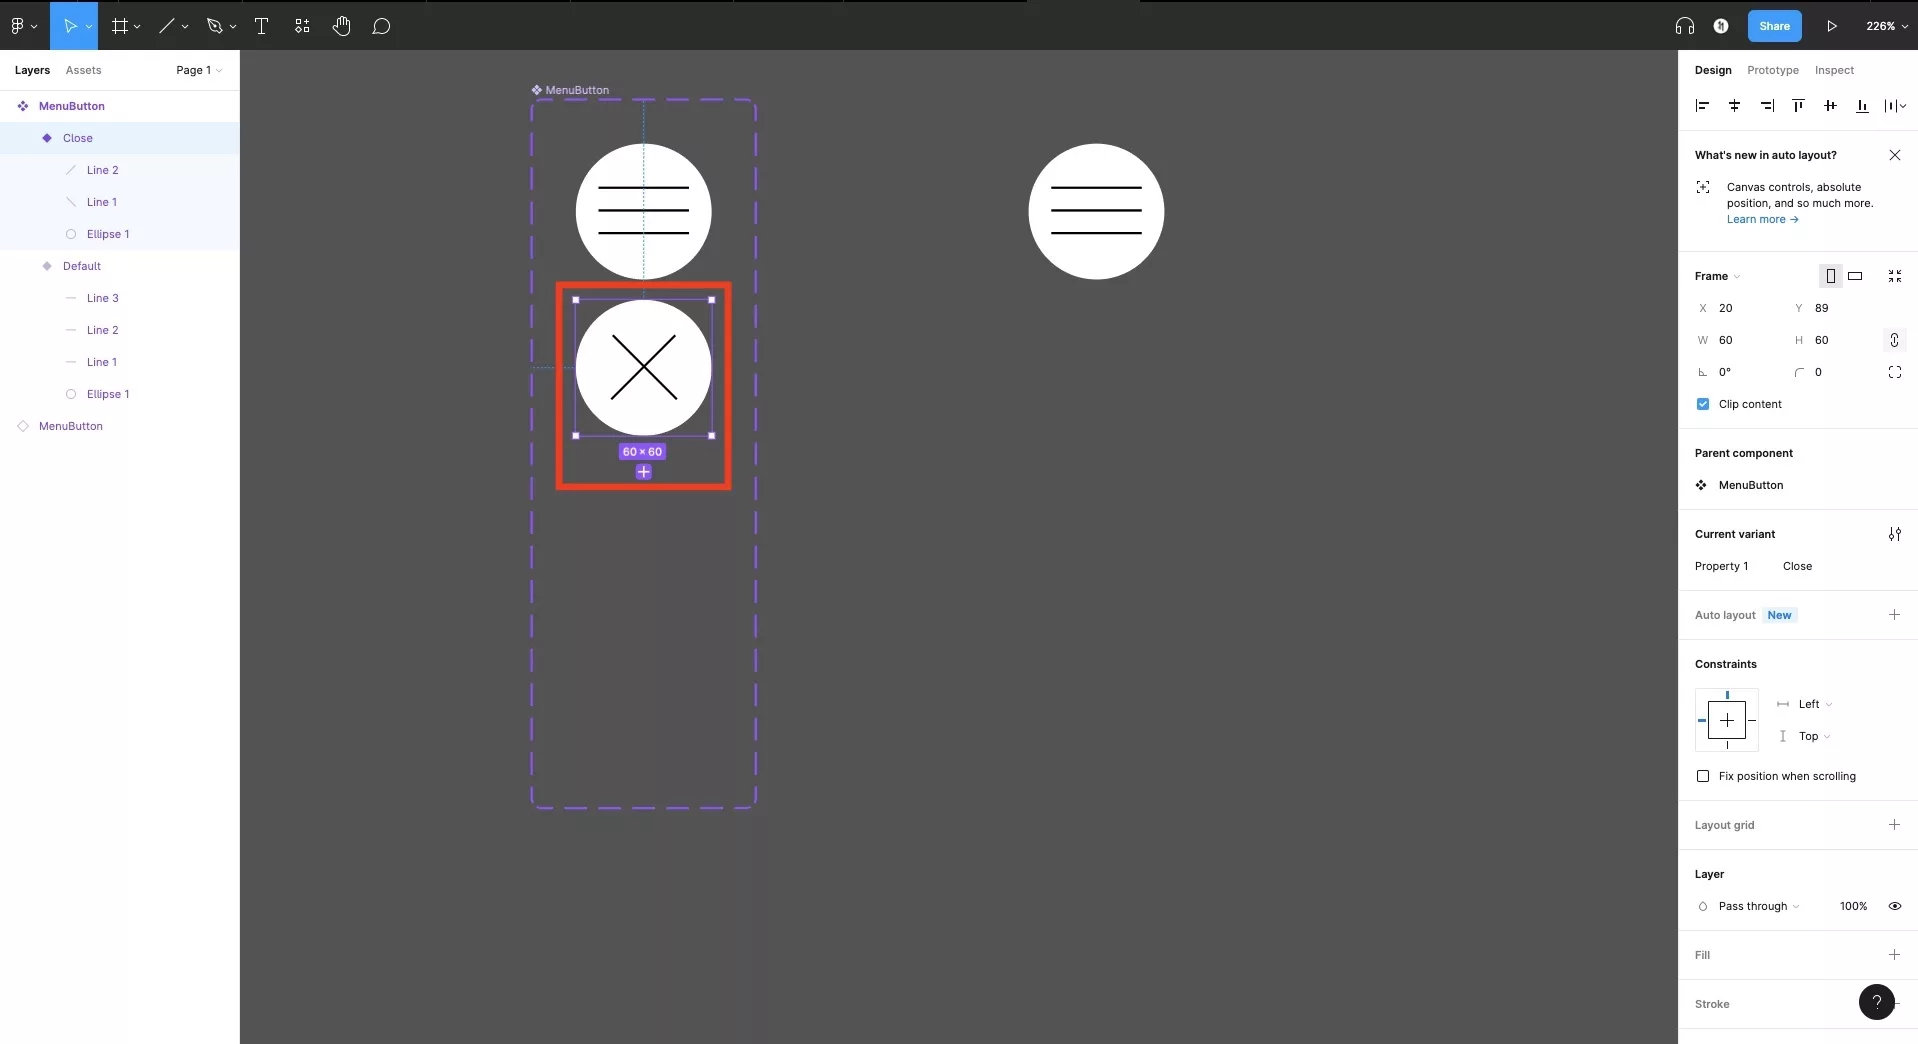 Illustrate your variation to your desired design. In our case we went from a hamburger icon to a close icon.